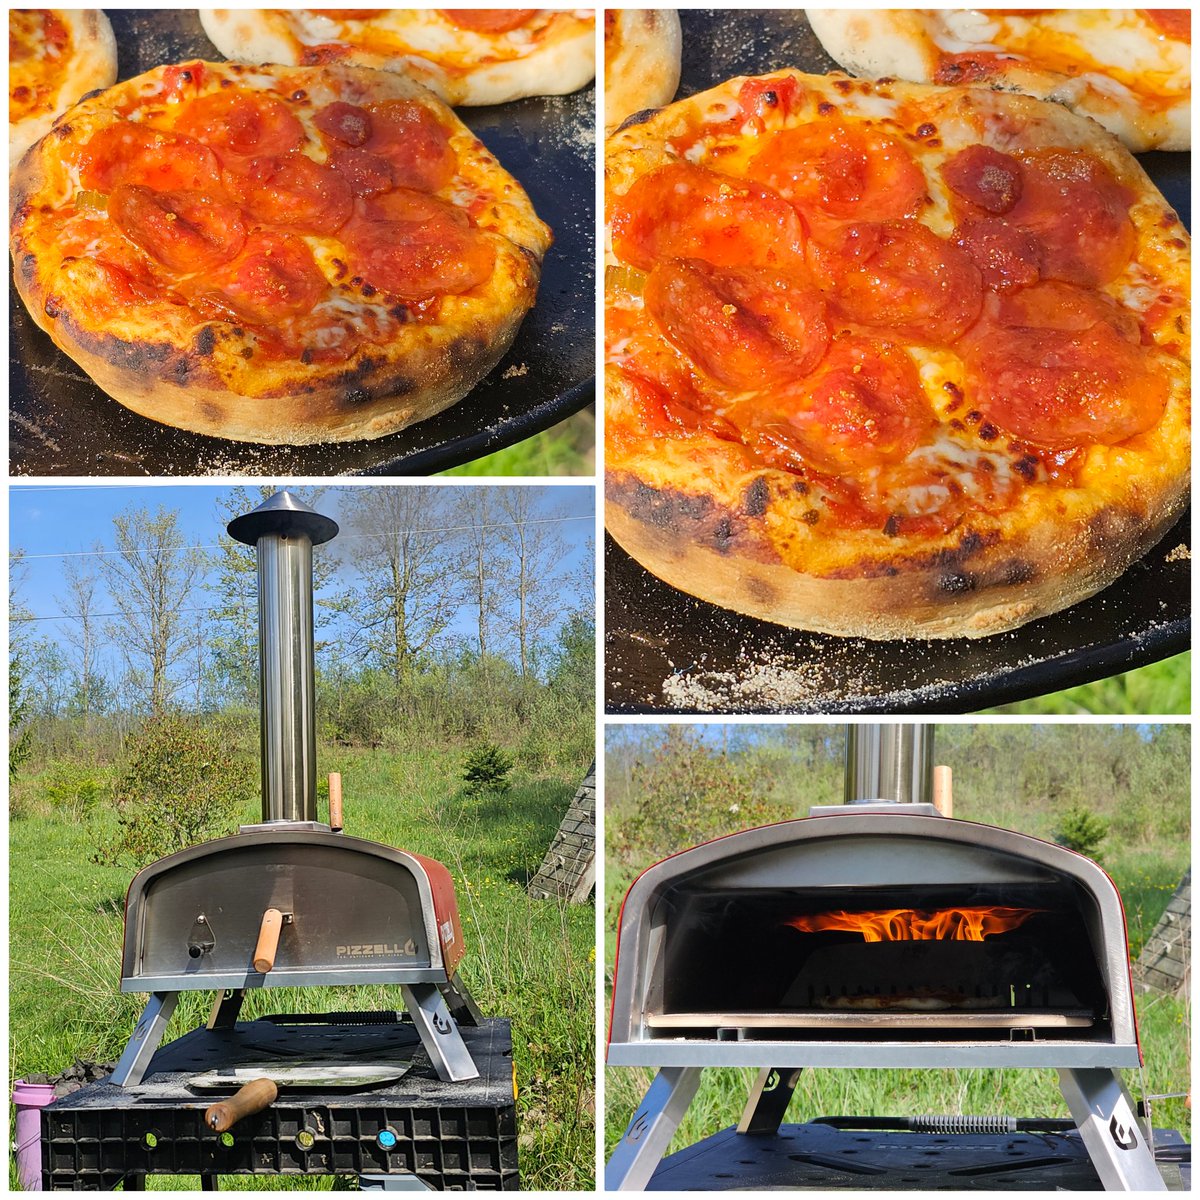 It's finally here! Wood fired pizza tonight on the ol homestead. Hubz bought me a pizza oven for mother's day. 😋 I absolutely love it! #AzrielsAcres #HomeCook #FoodDork